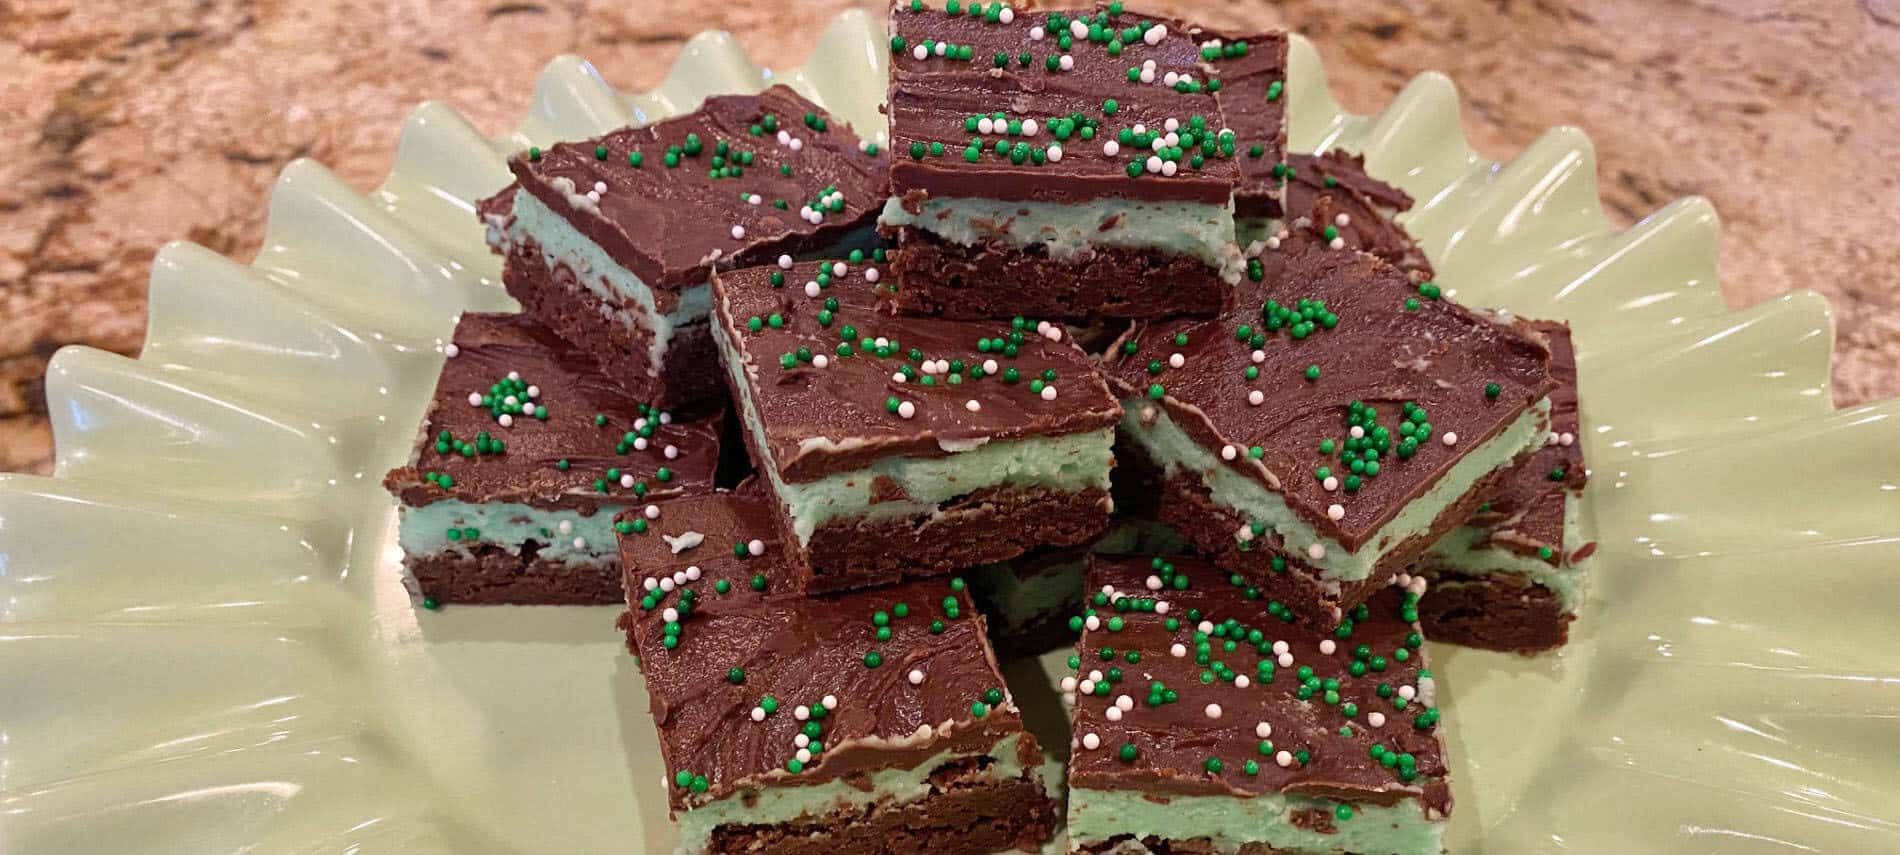 Chocolate brownies with a mint green frosting and chocolate ganache with green and white sprinkles